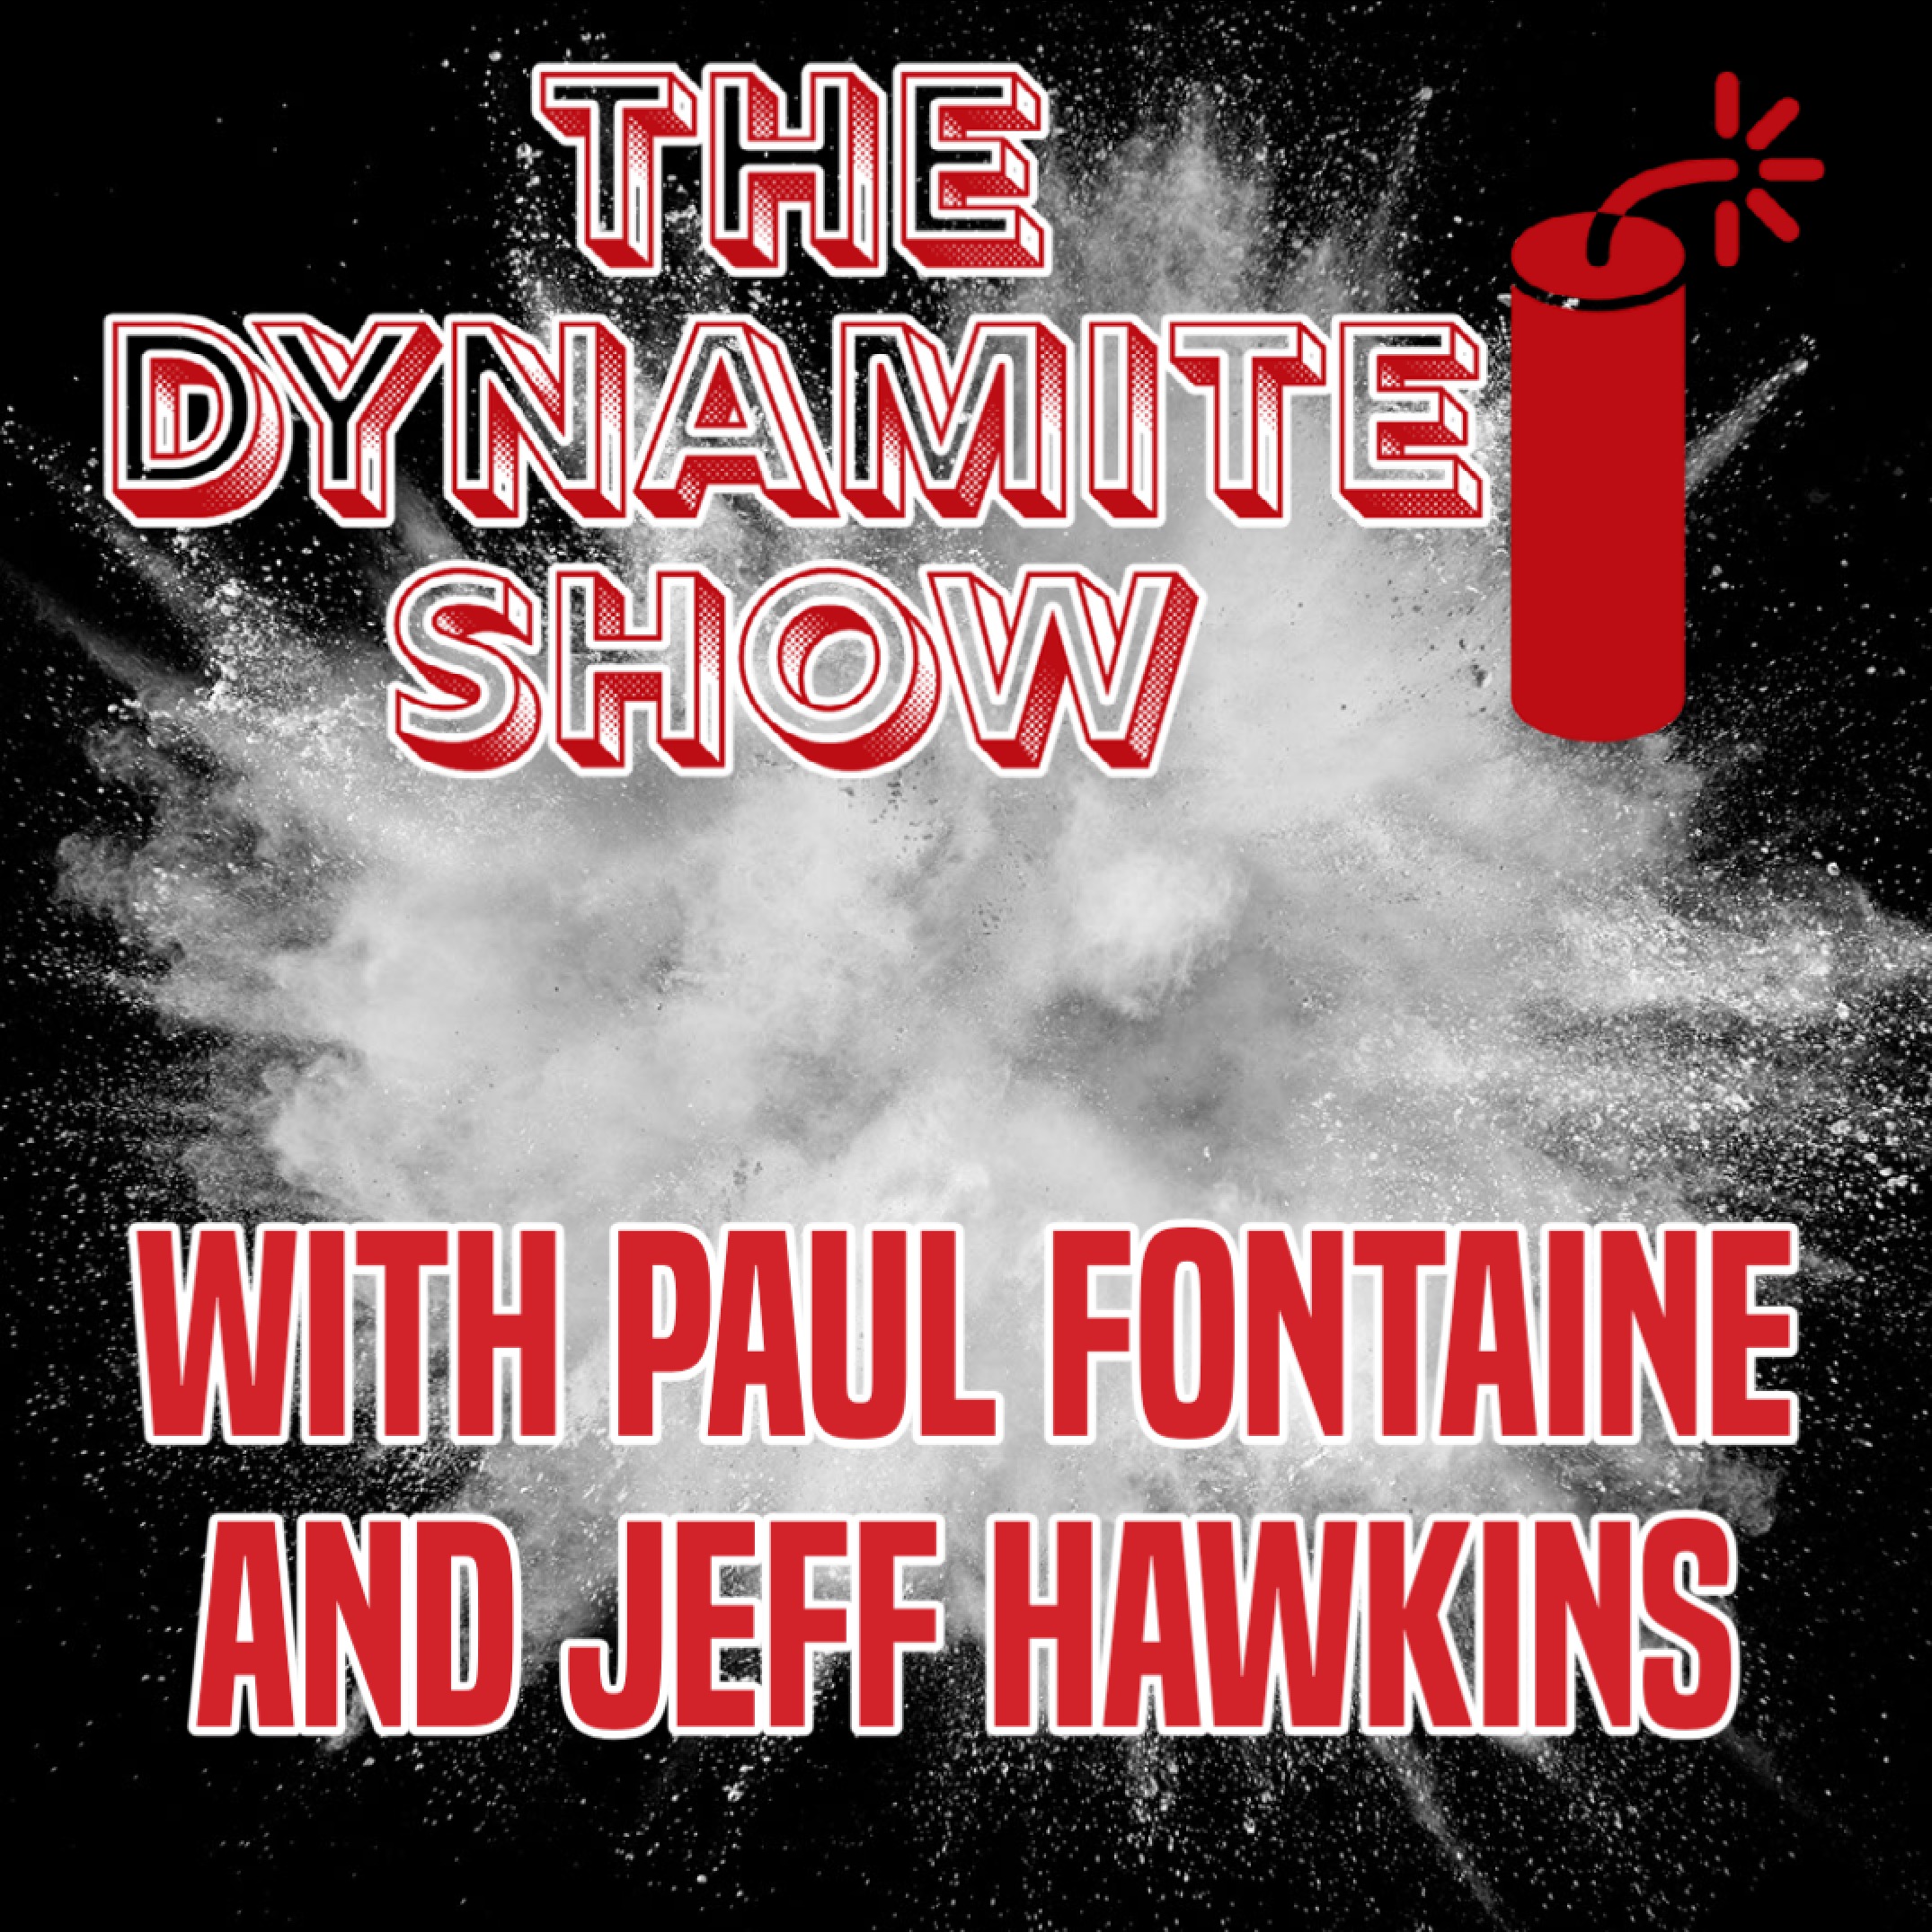 The Dynamite Show - Continental Classic Finals Are Set | Joe Turns on MJF | New ROH Tag Champs